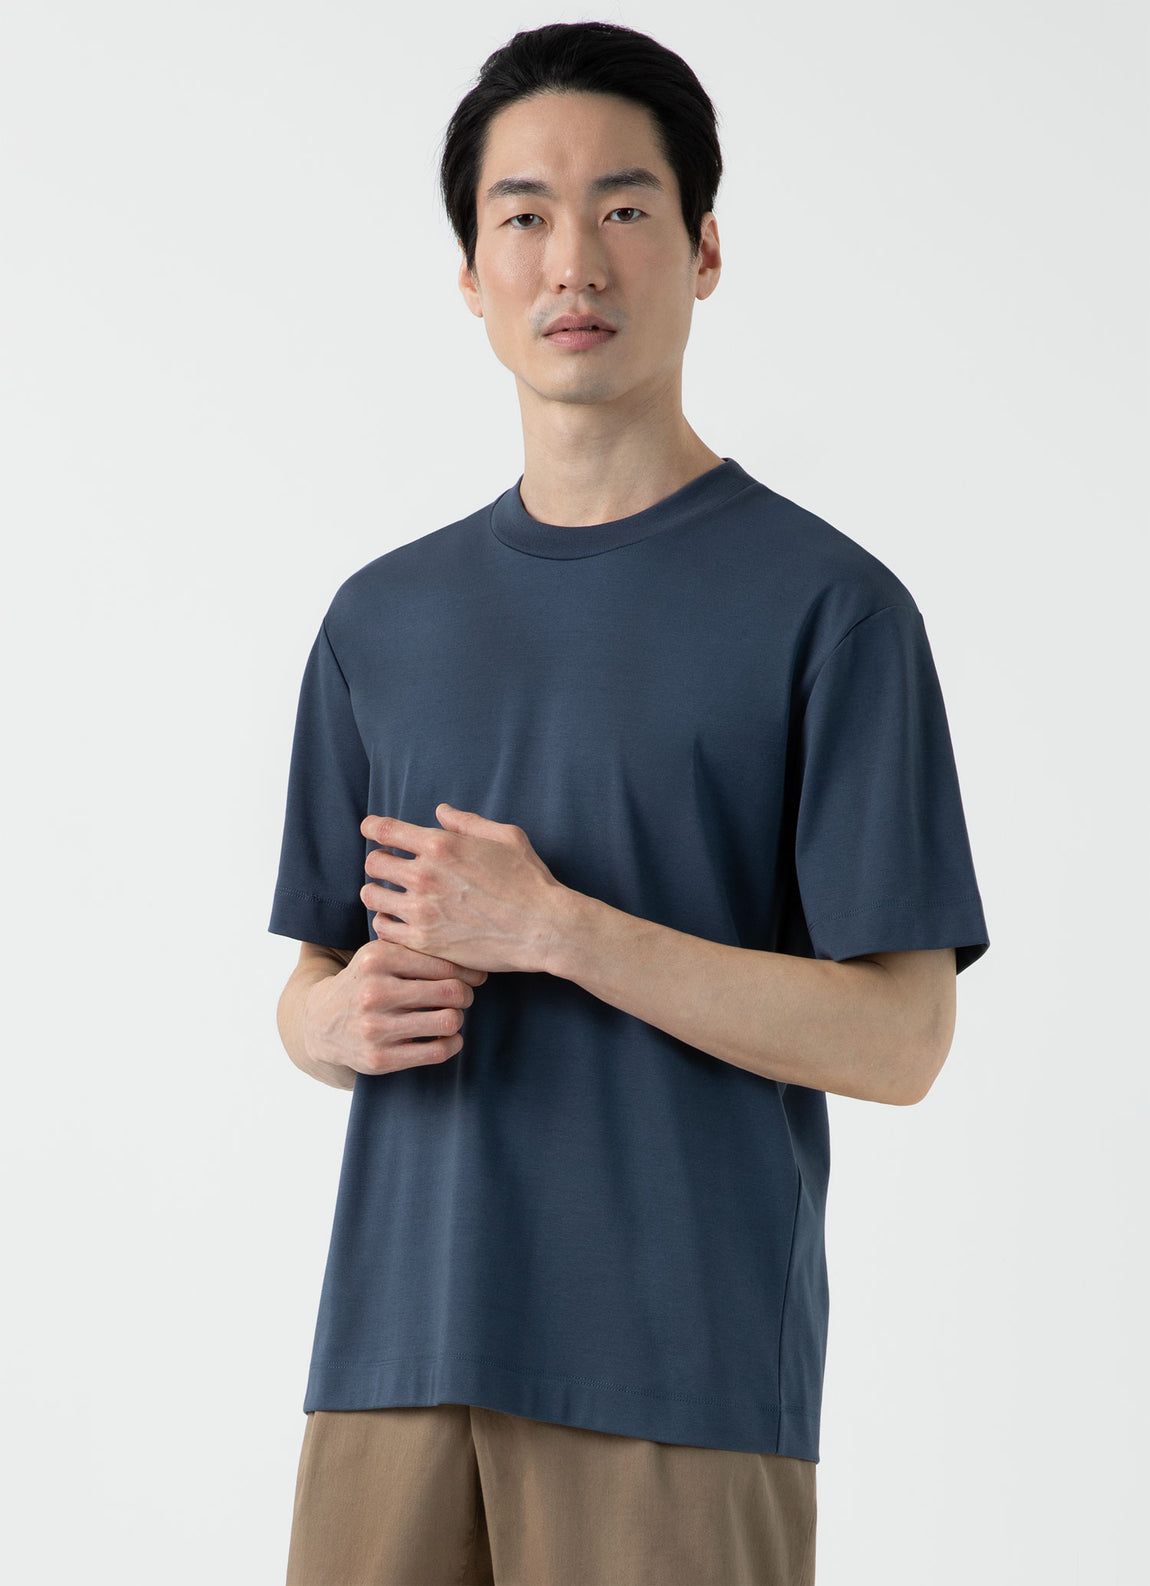 Men's Relaxed Fit Heavyweight T-shirt in Slate Blue